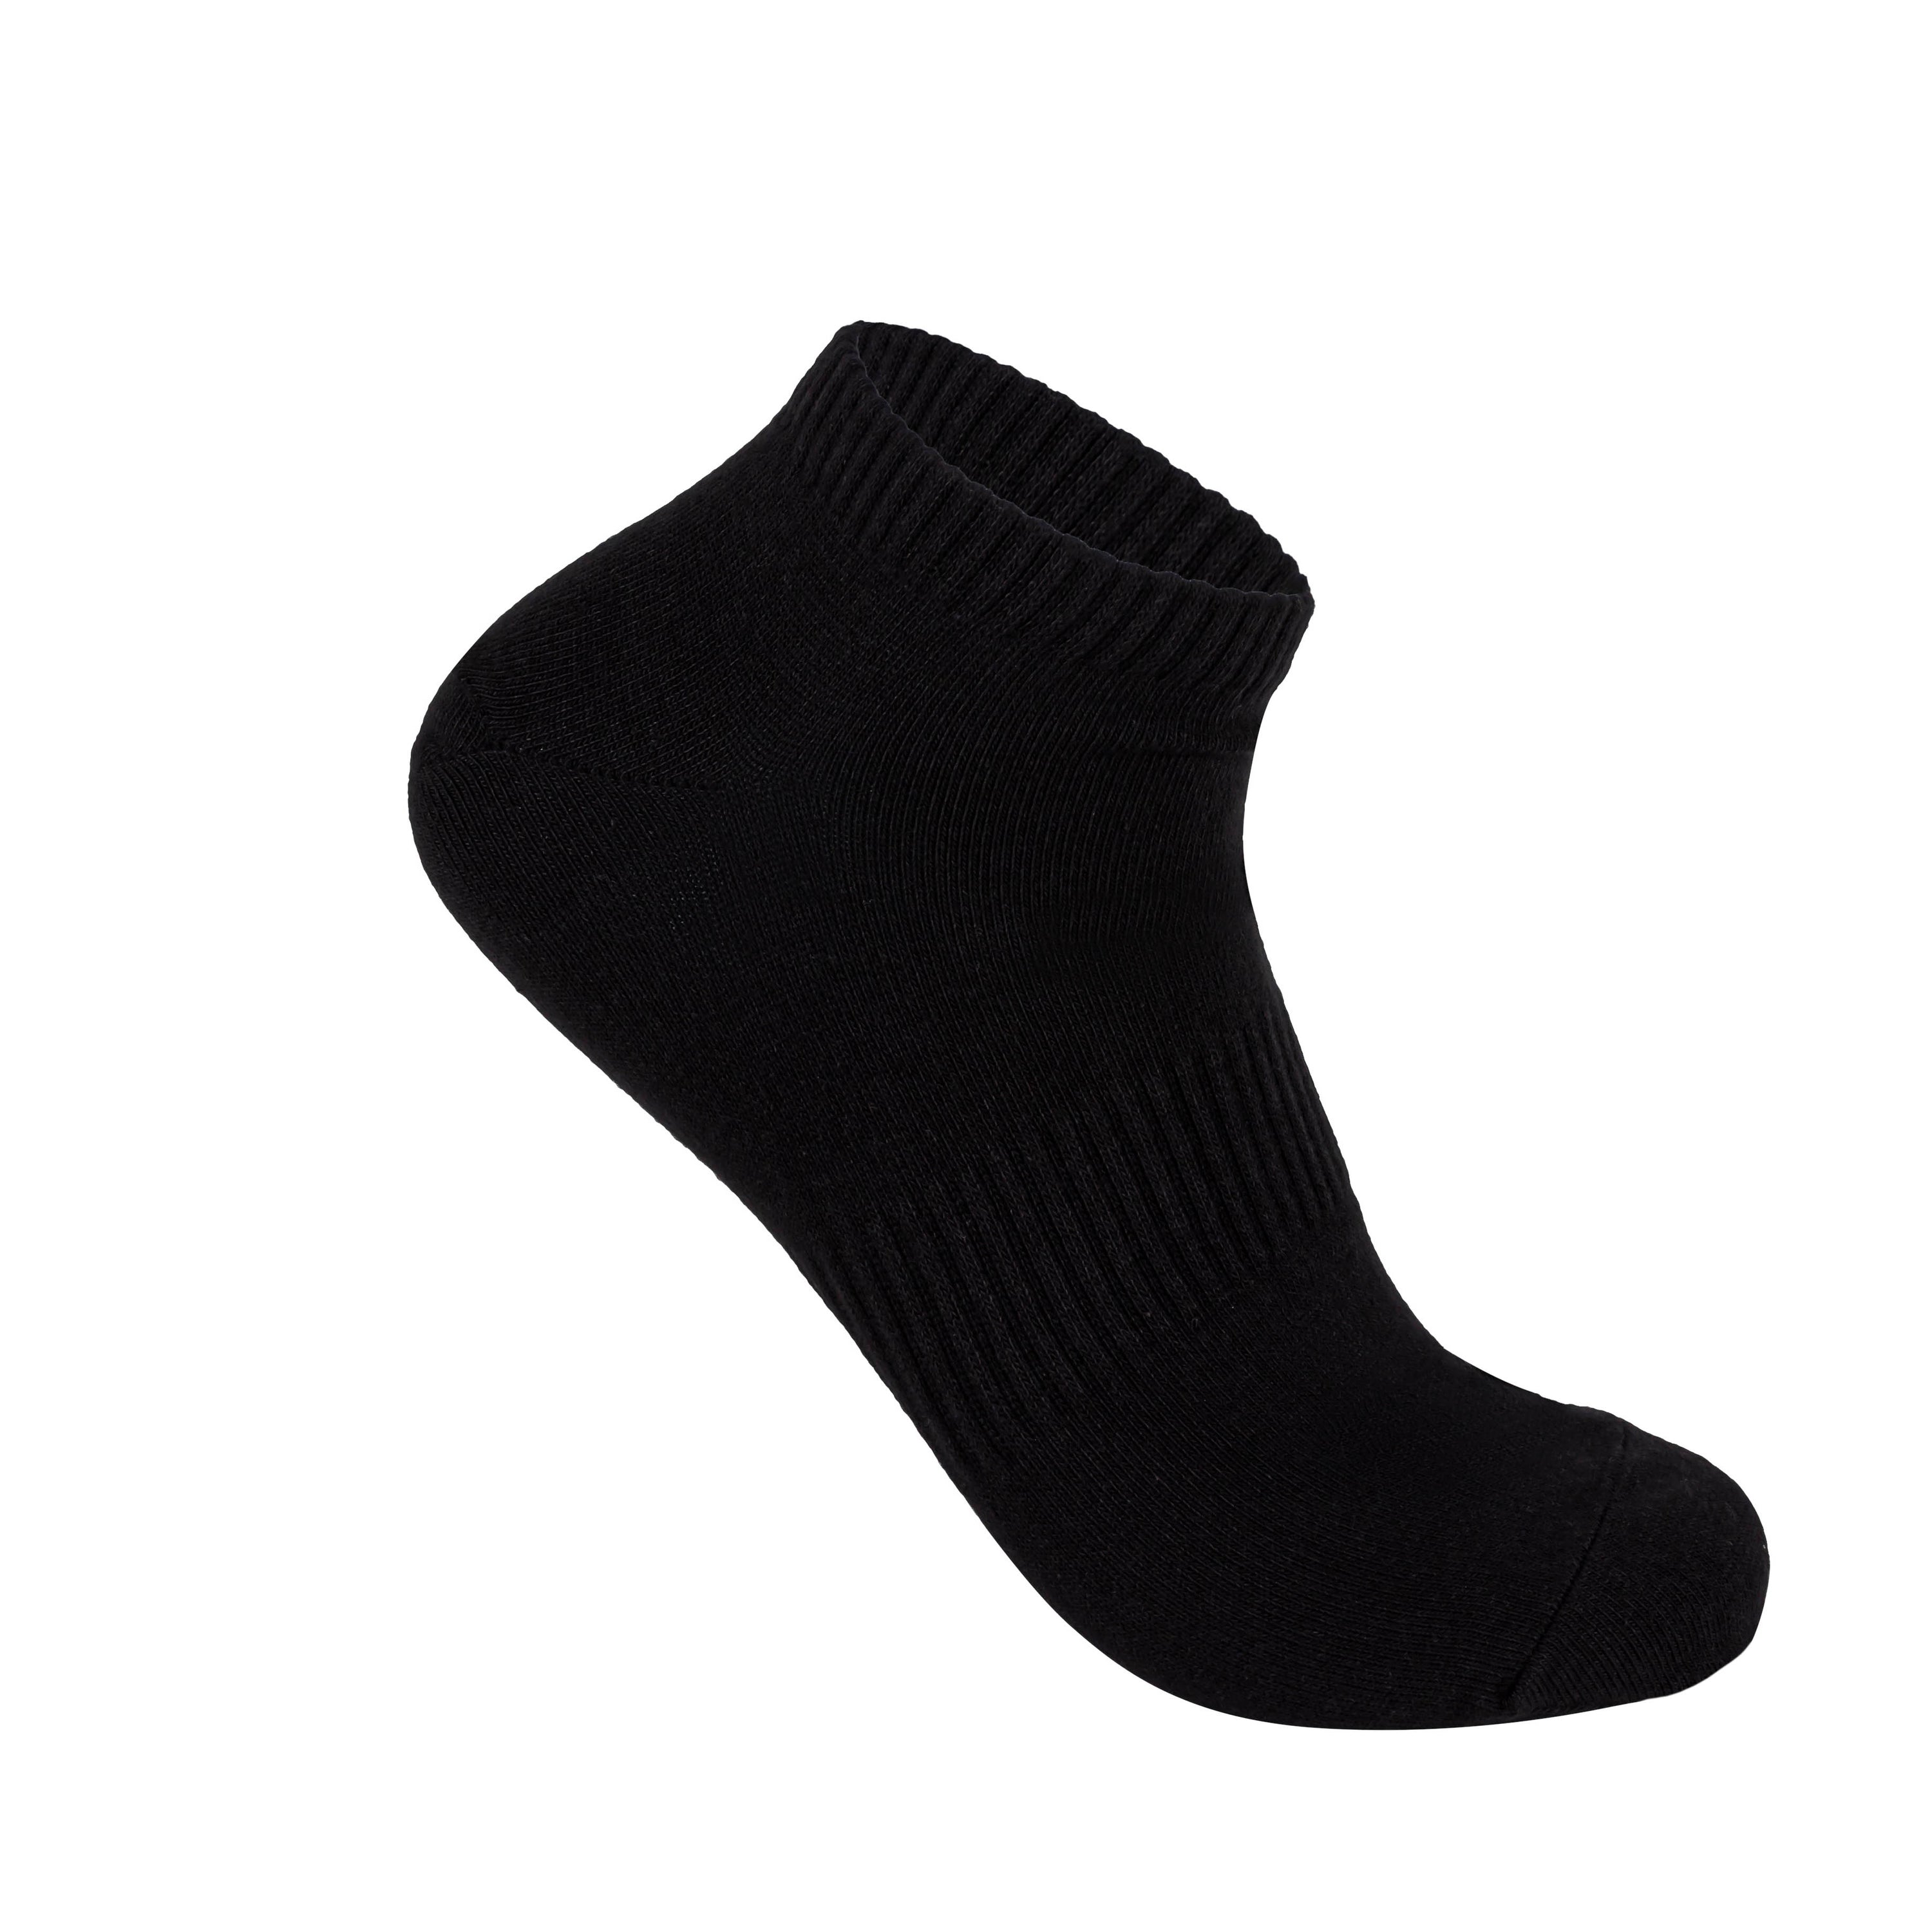 A_Week_Of_Socks_Socks_square_extra-low_black_product